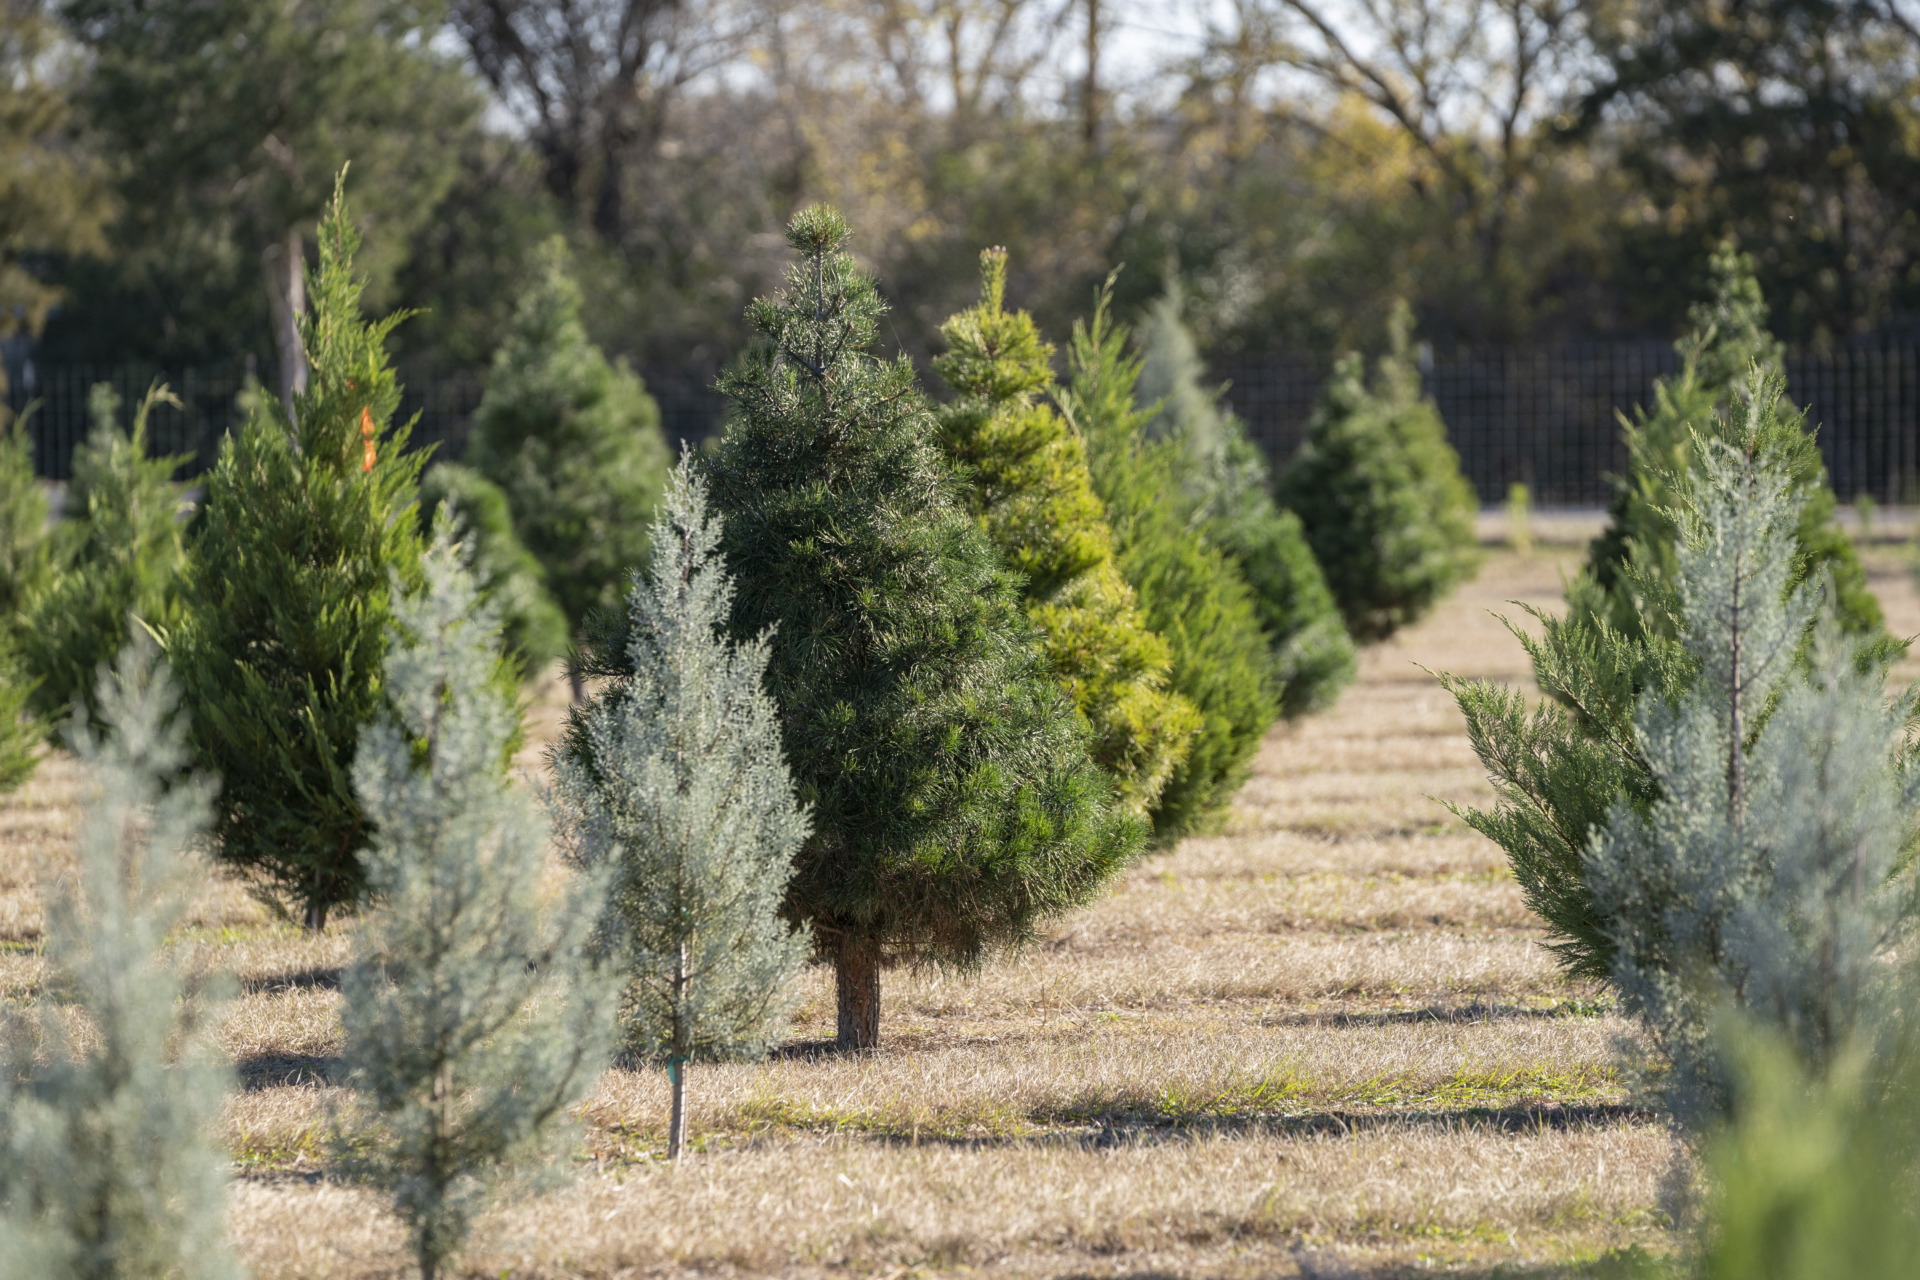 Texas Christmas tree industry expecting tree-mendous year